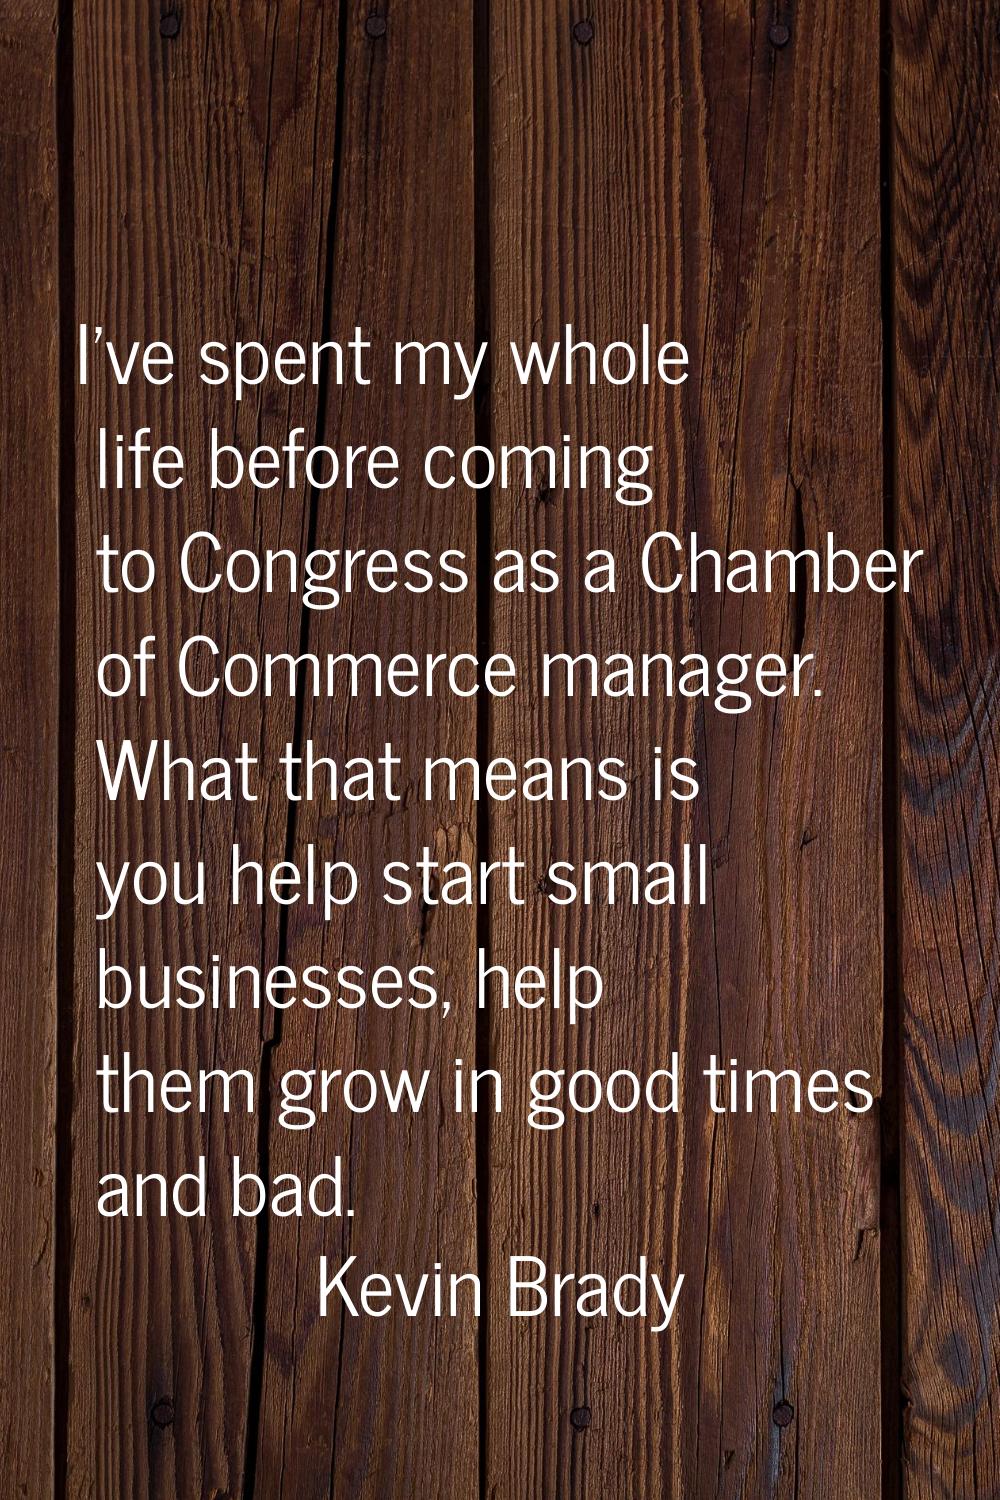 I've spent my whole life before coming to Congress as a Chamber of Commerce manager. What that mean